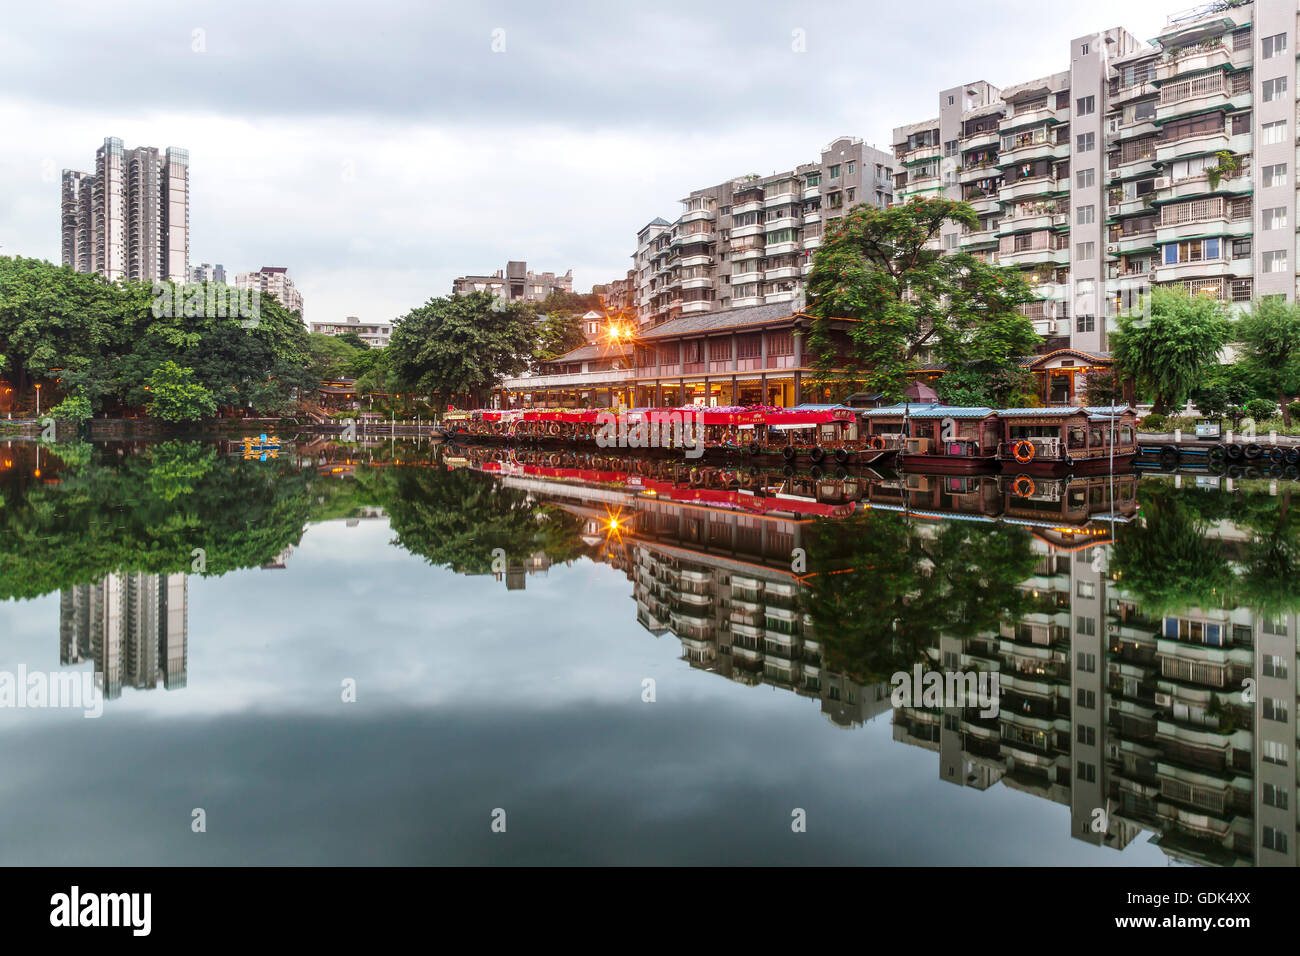 Skyline and reflexions of boats at Liwan Park, Guangzhou, China. Stock Photo